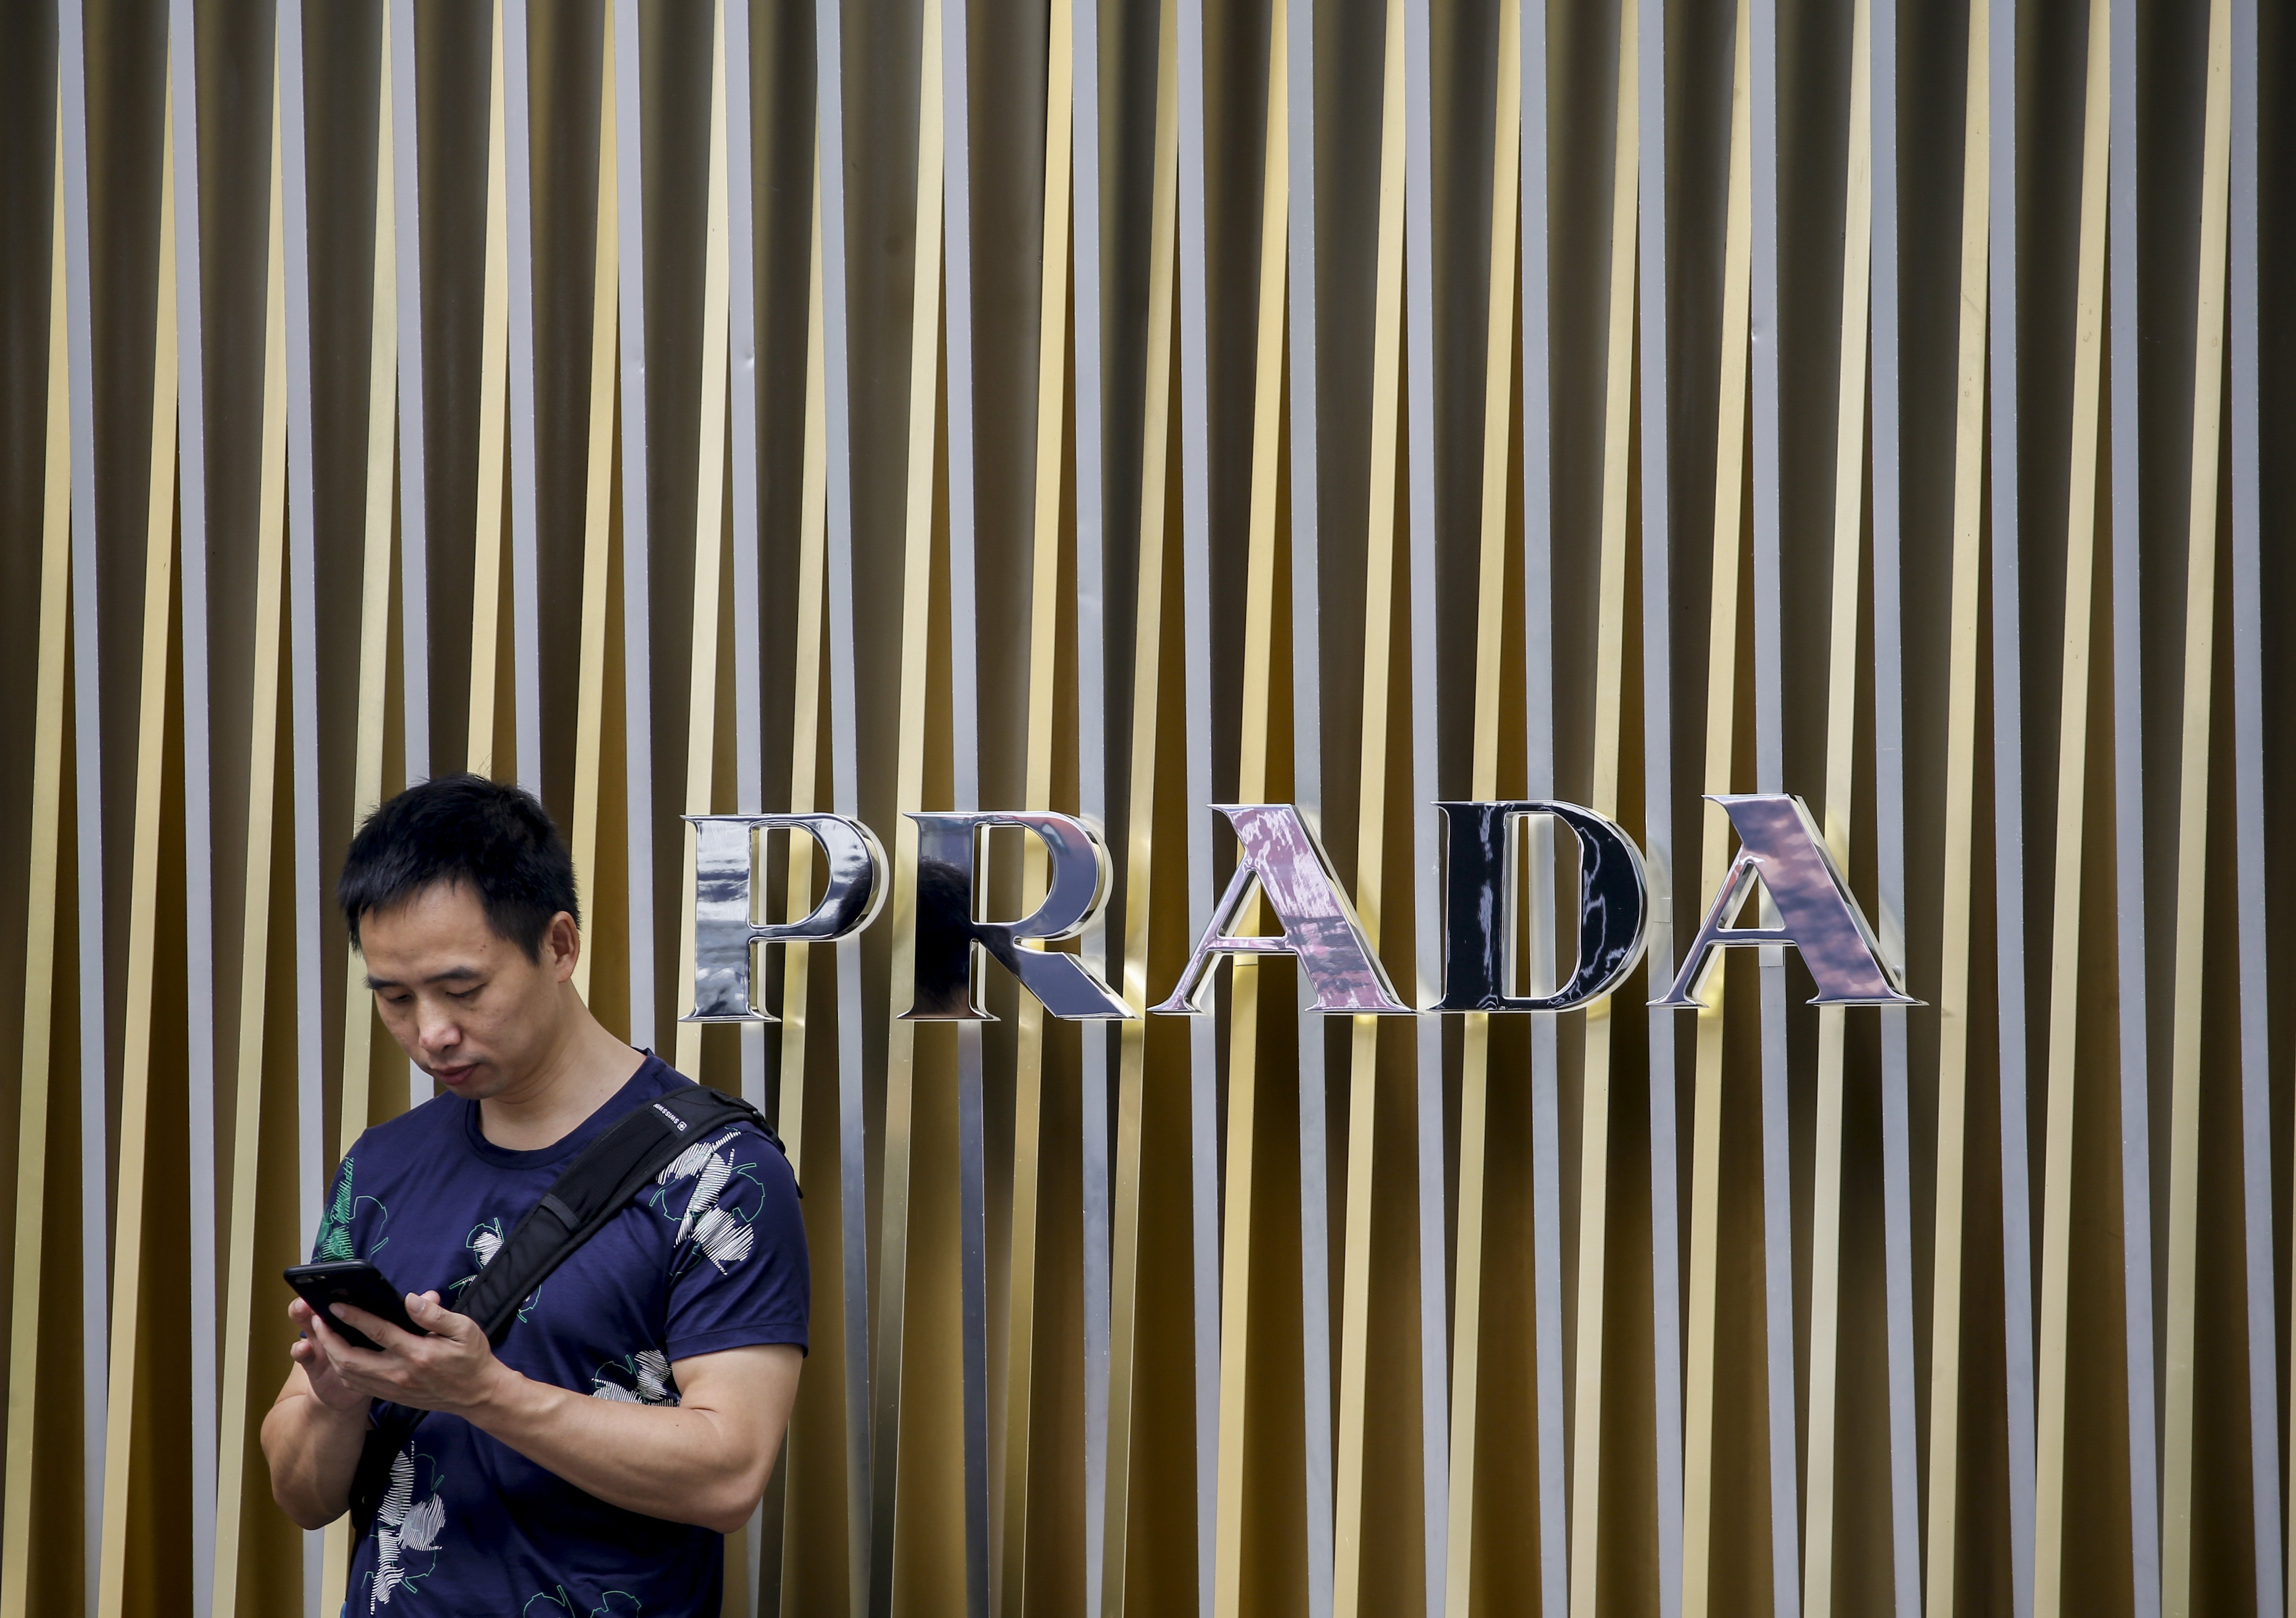 2017-07-14 10:19:38 epa06086327 A man looks at his phone while standing next to a Prada logo in Singapore, 14 July 2017. EPA/WALLACE WOON